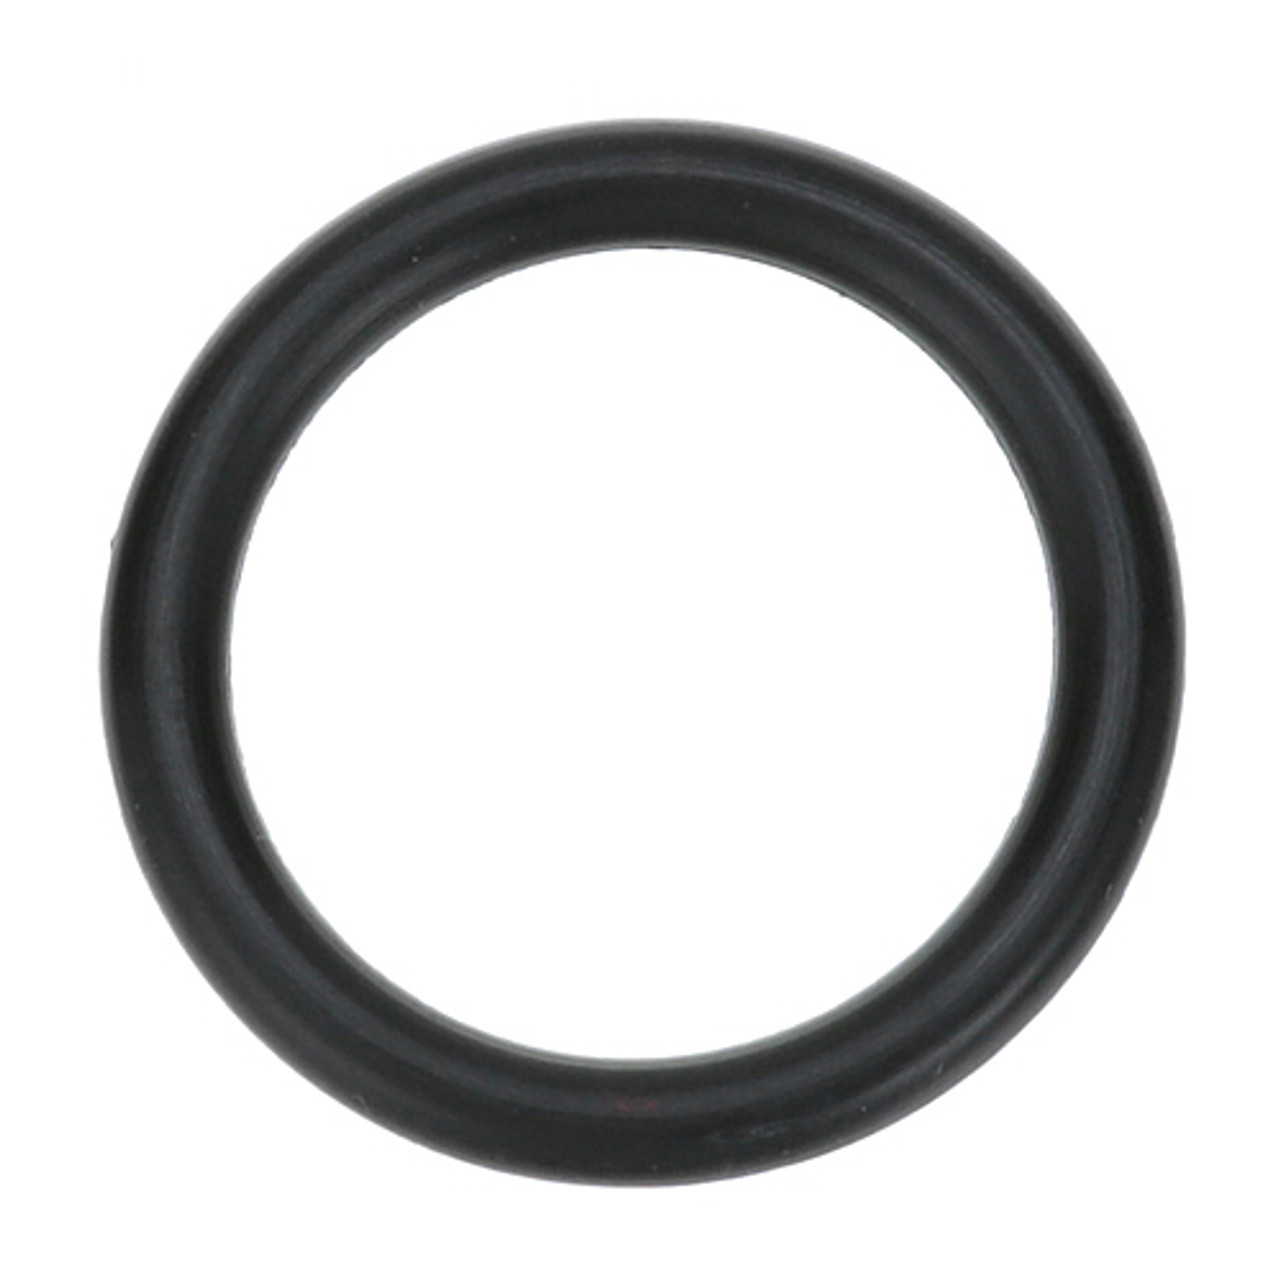 O-Ring 7/8" Id X 1/8" Width - Replacement Part For Electro Freeze 160554